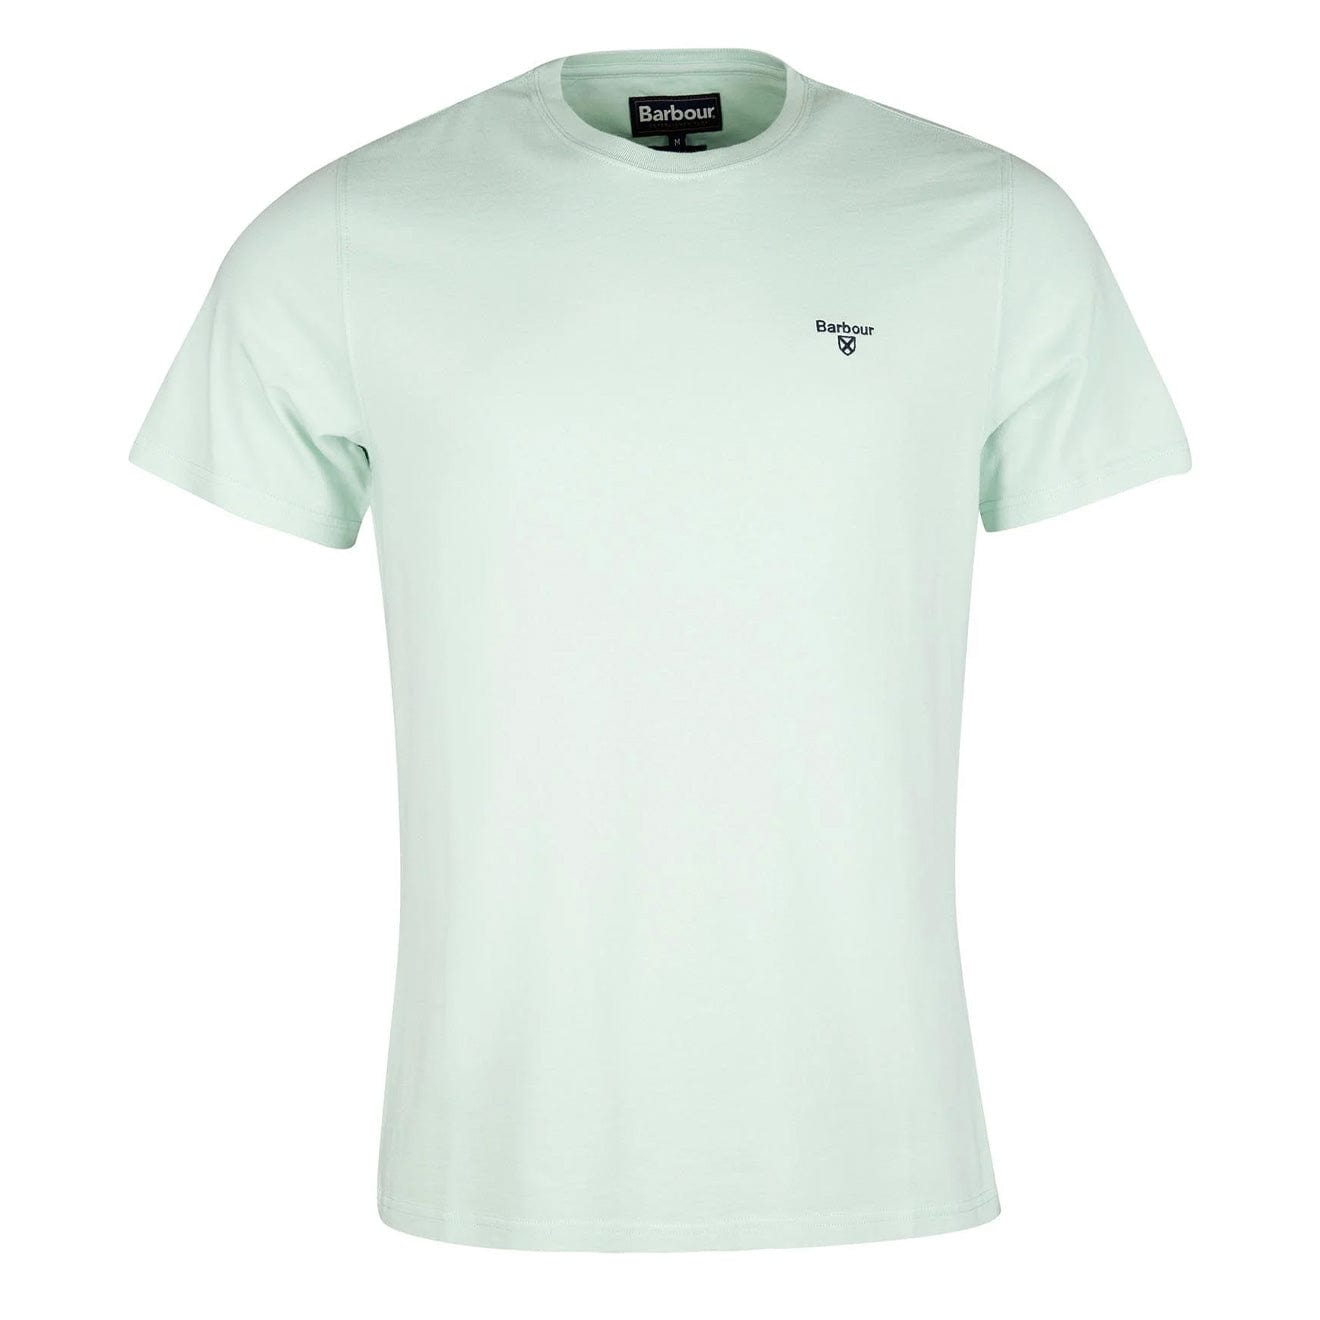 Barbour Sports Tee Dusty Mint | The Sporting Lodge